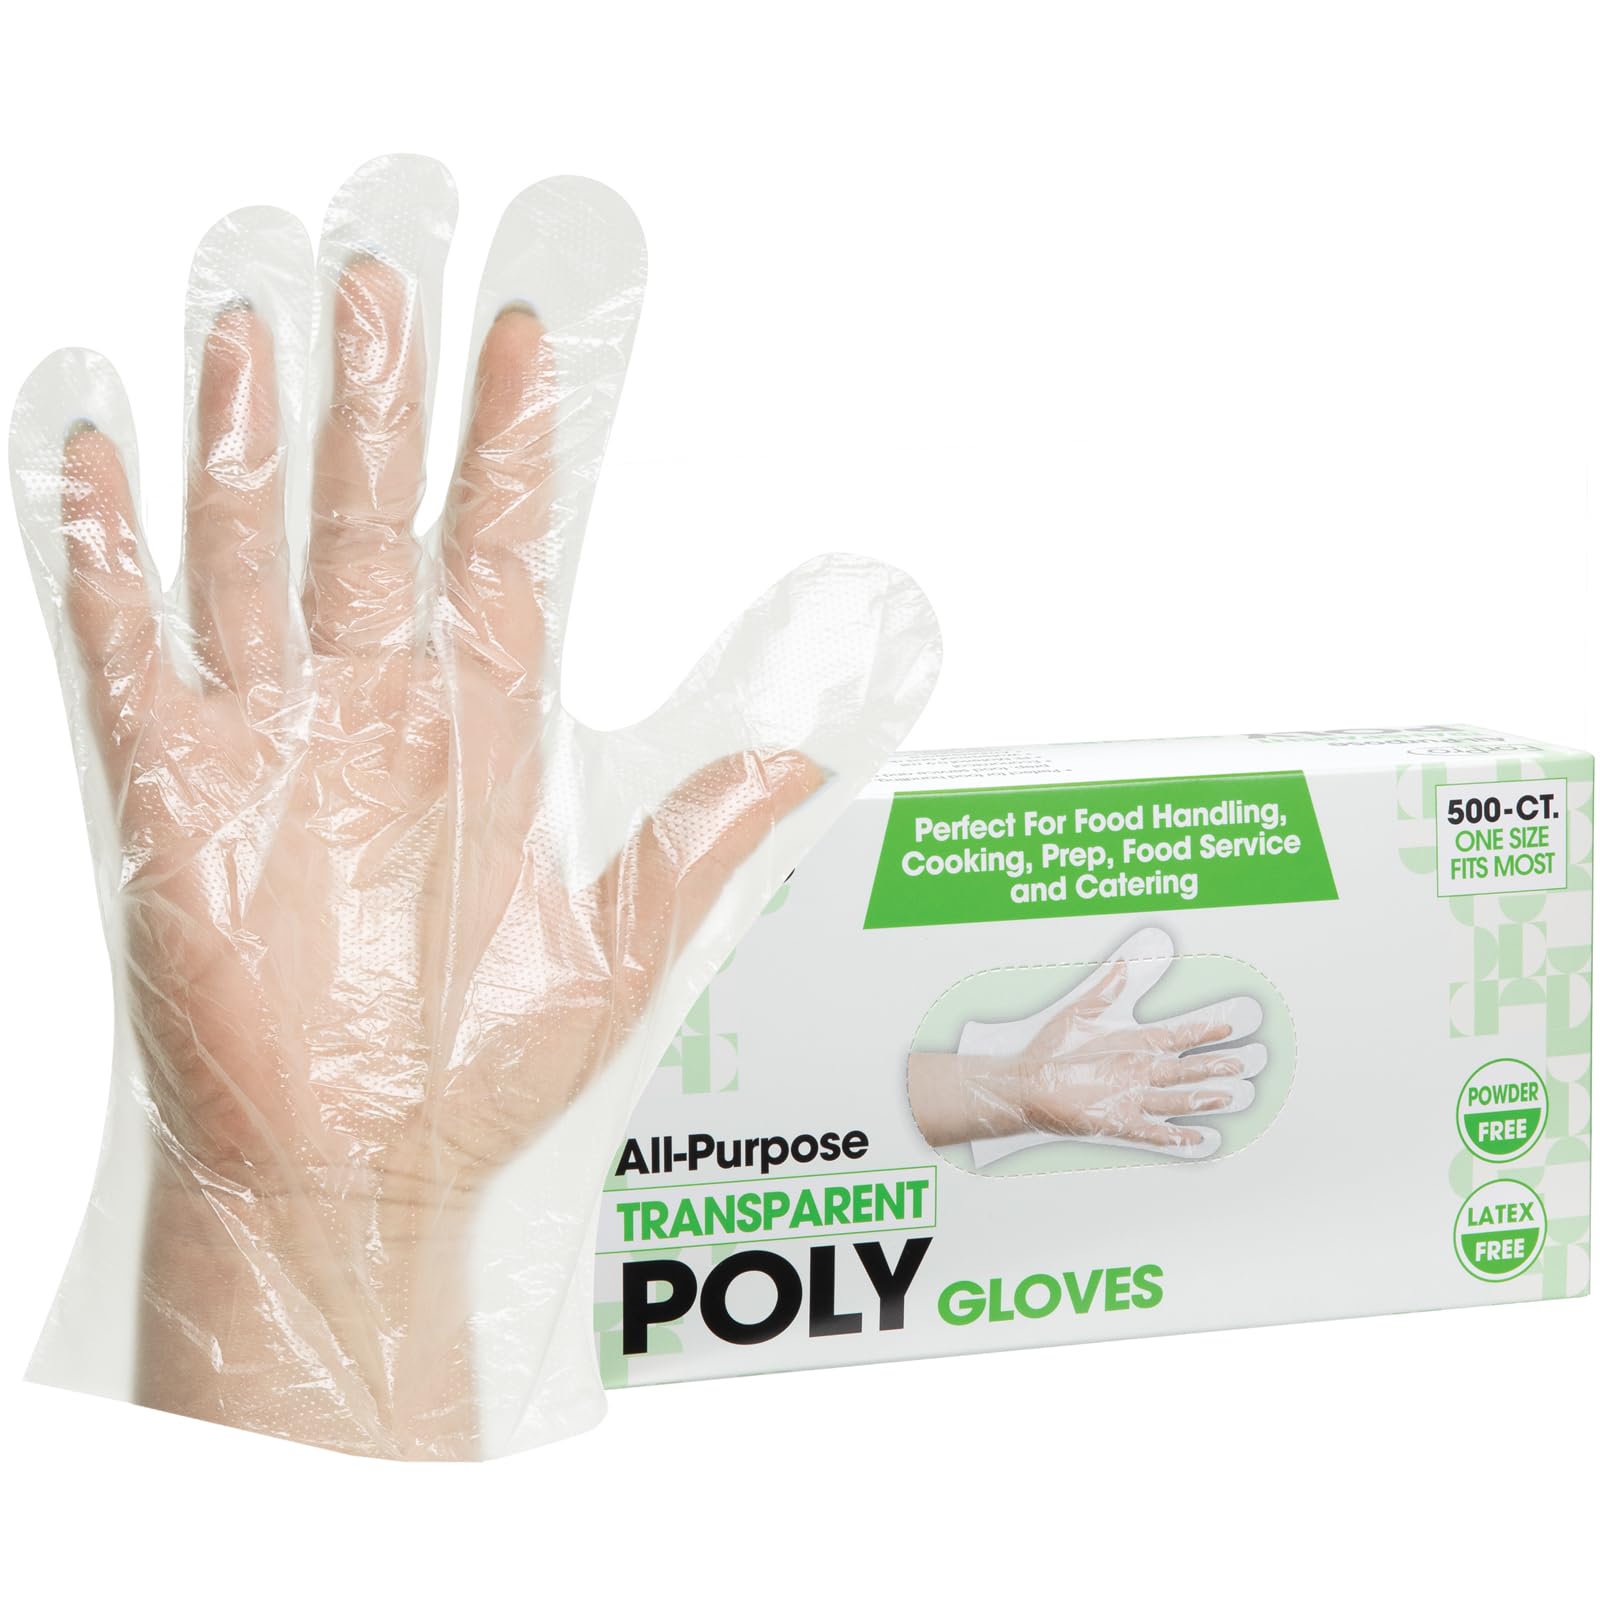 ForPro Disposable Poly Plastic Gloves, All-Purpose Food Safe Gloves for Cooking, Food Handling, Food Prep, Latex-Free, Non-Sterile, Clear, One Size, 500-Count